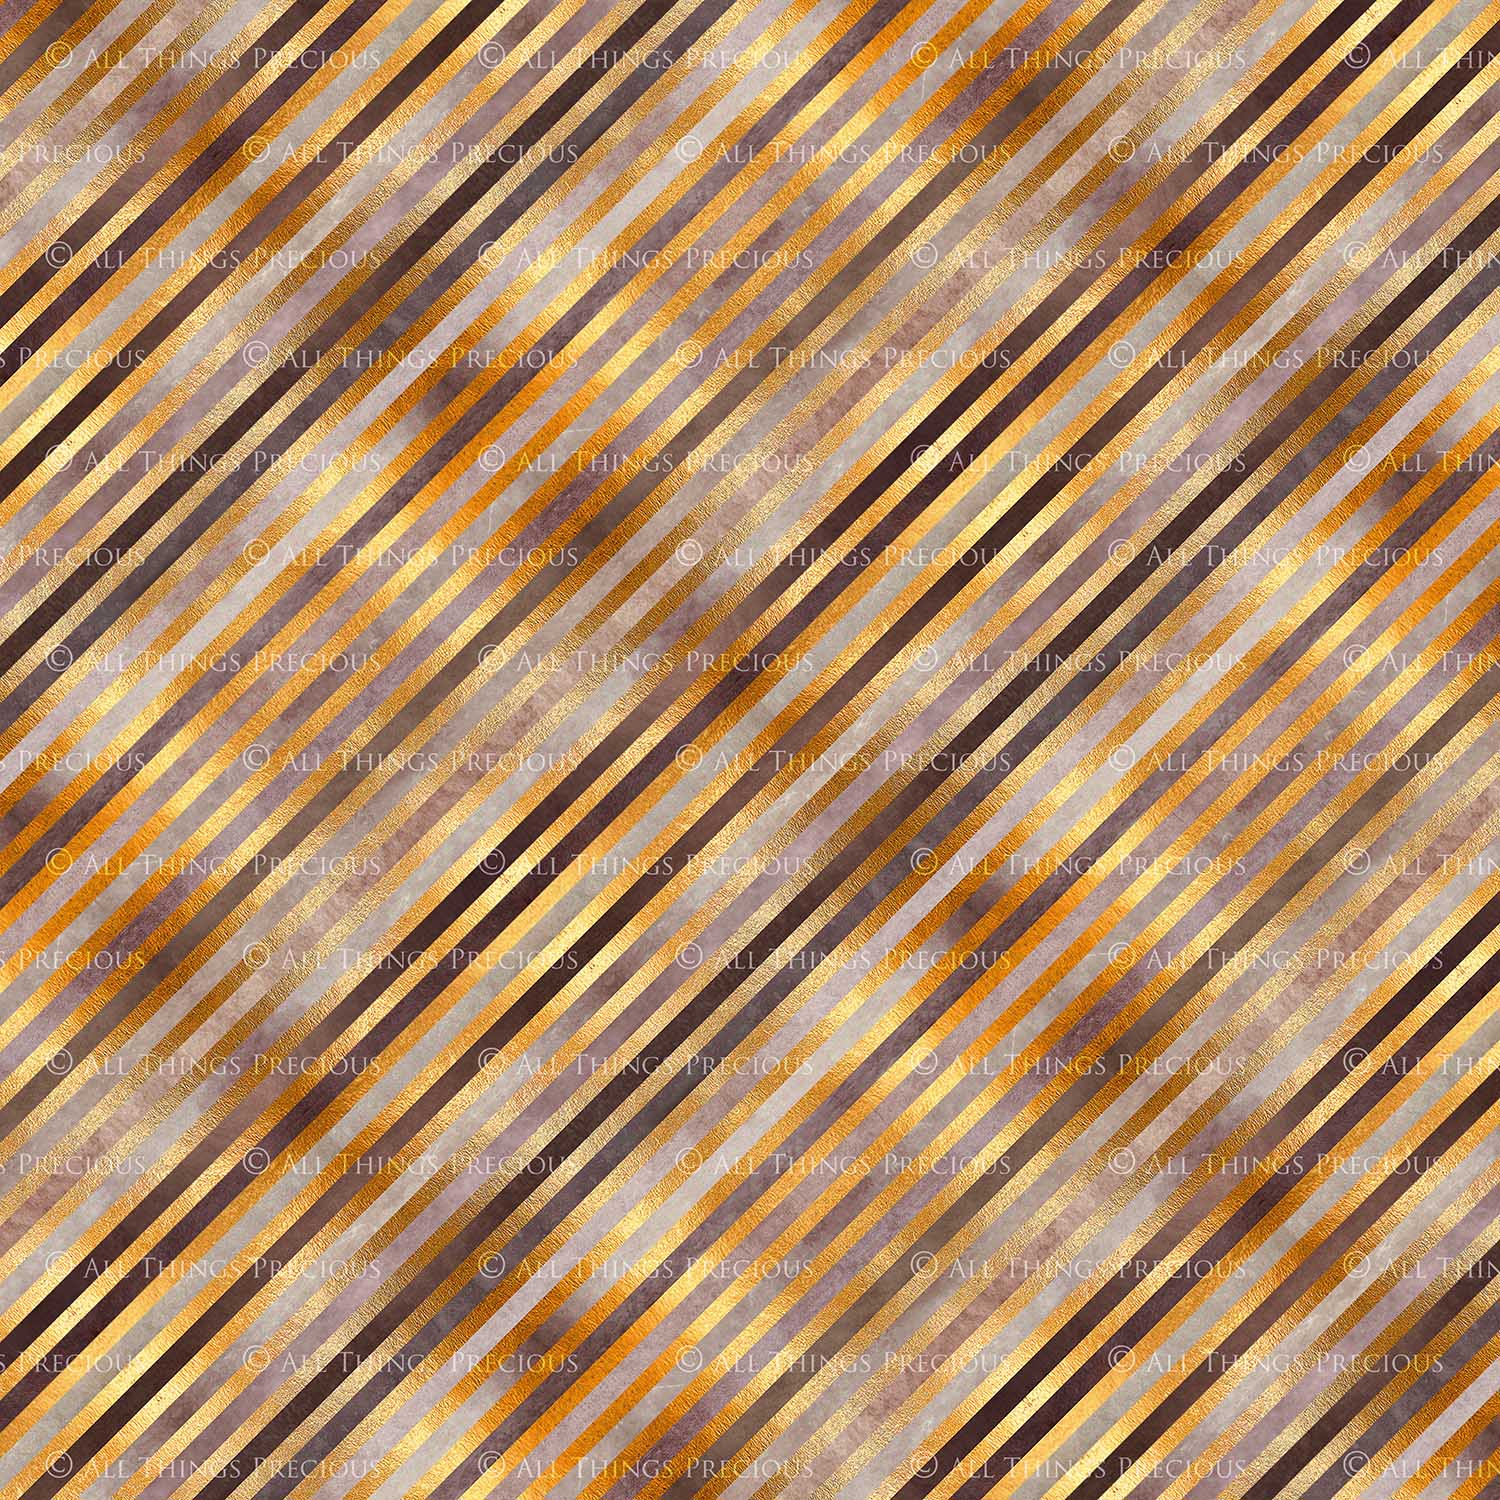 TEXTURED PATTERN Gold & Brown - Digital Papers